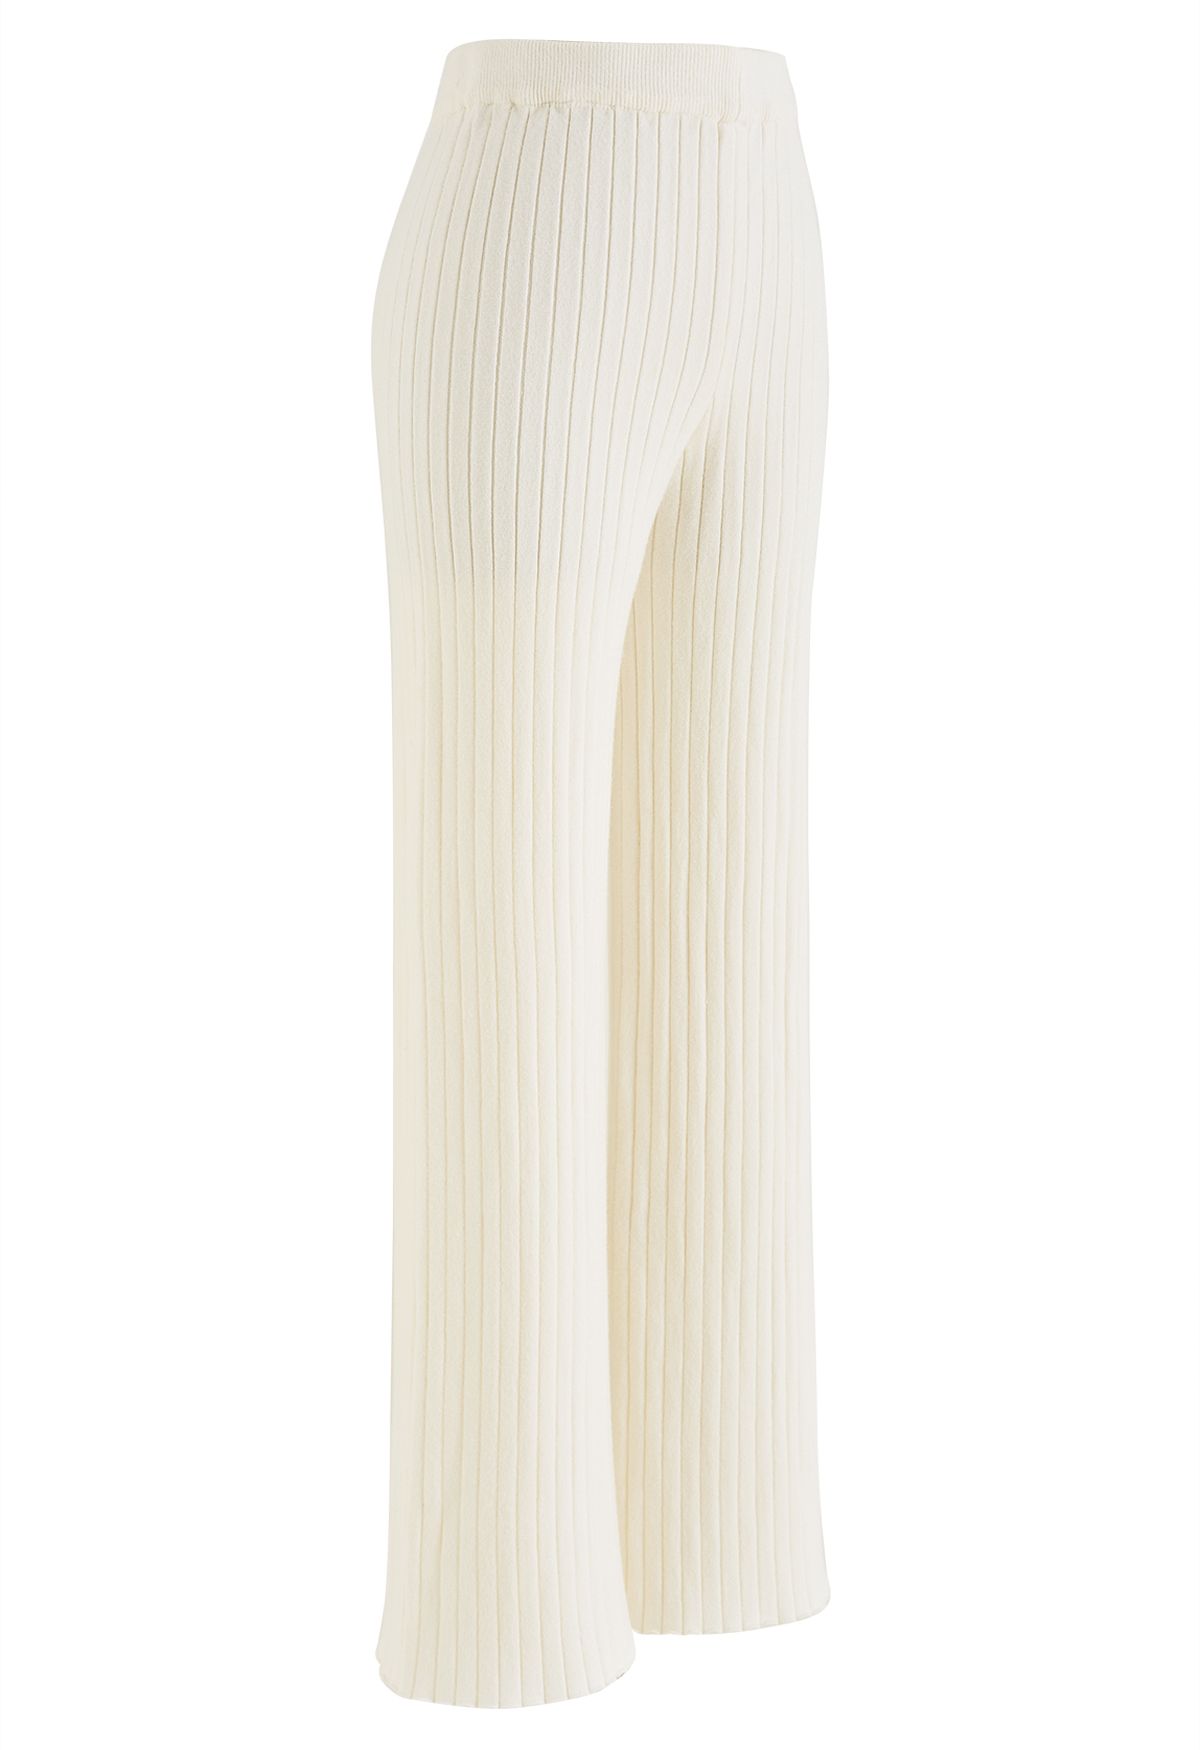 Ribbed Straight Leg Knit Pants in Cream - Retro, Indie and Unique